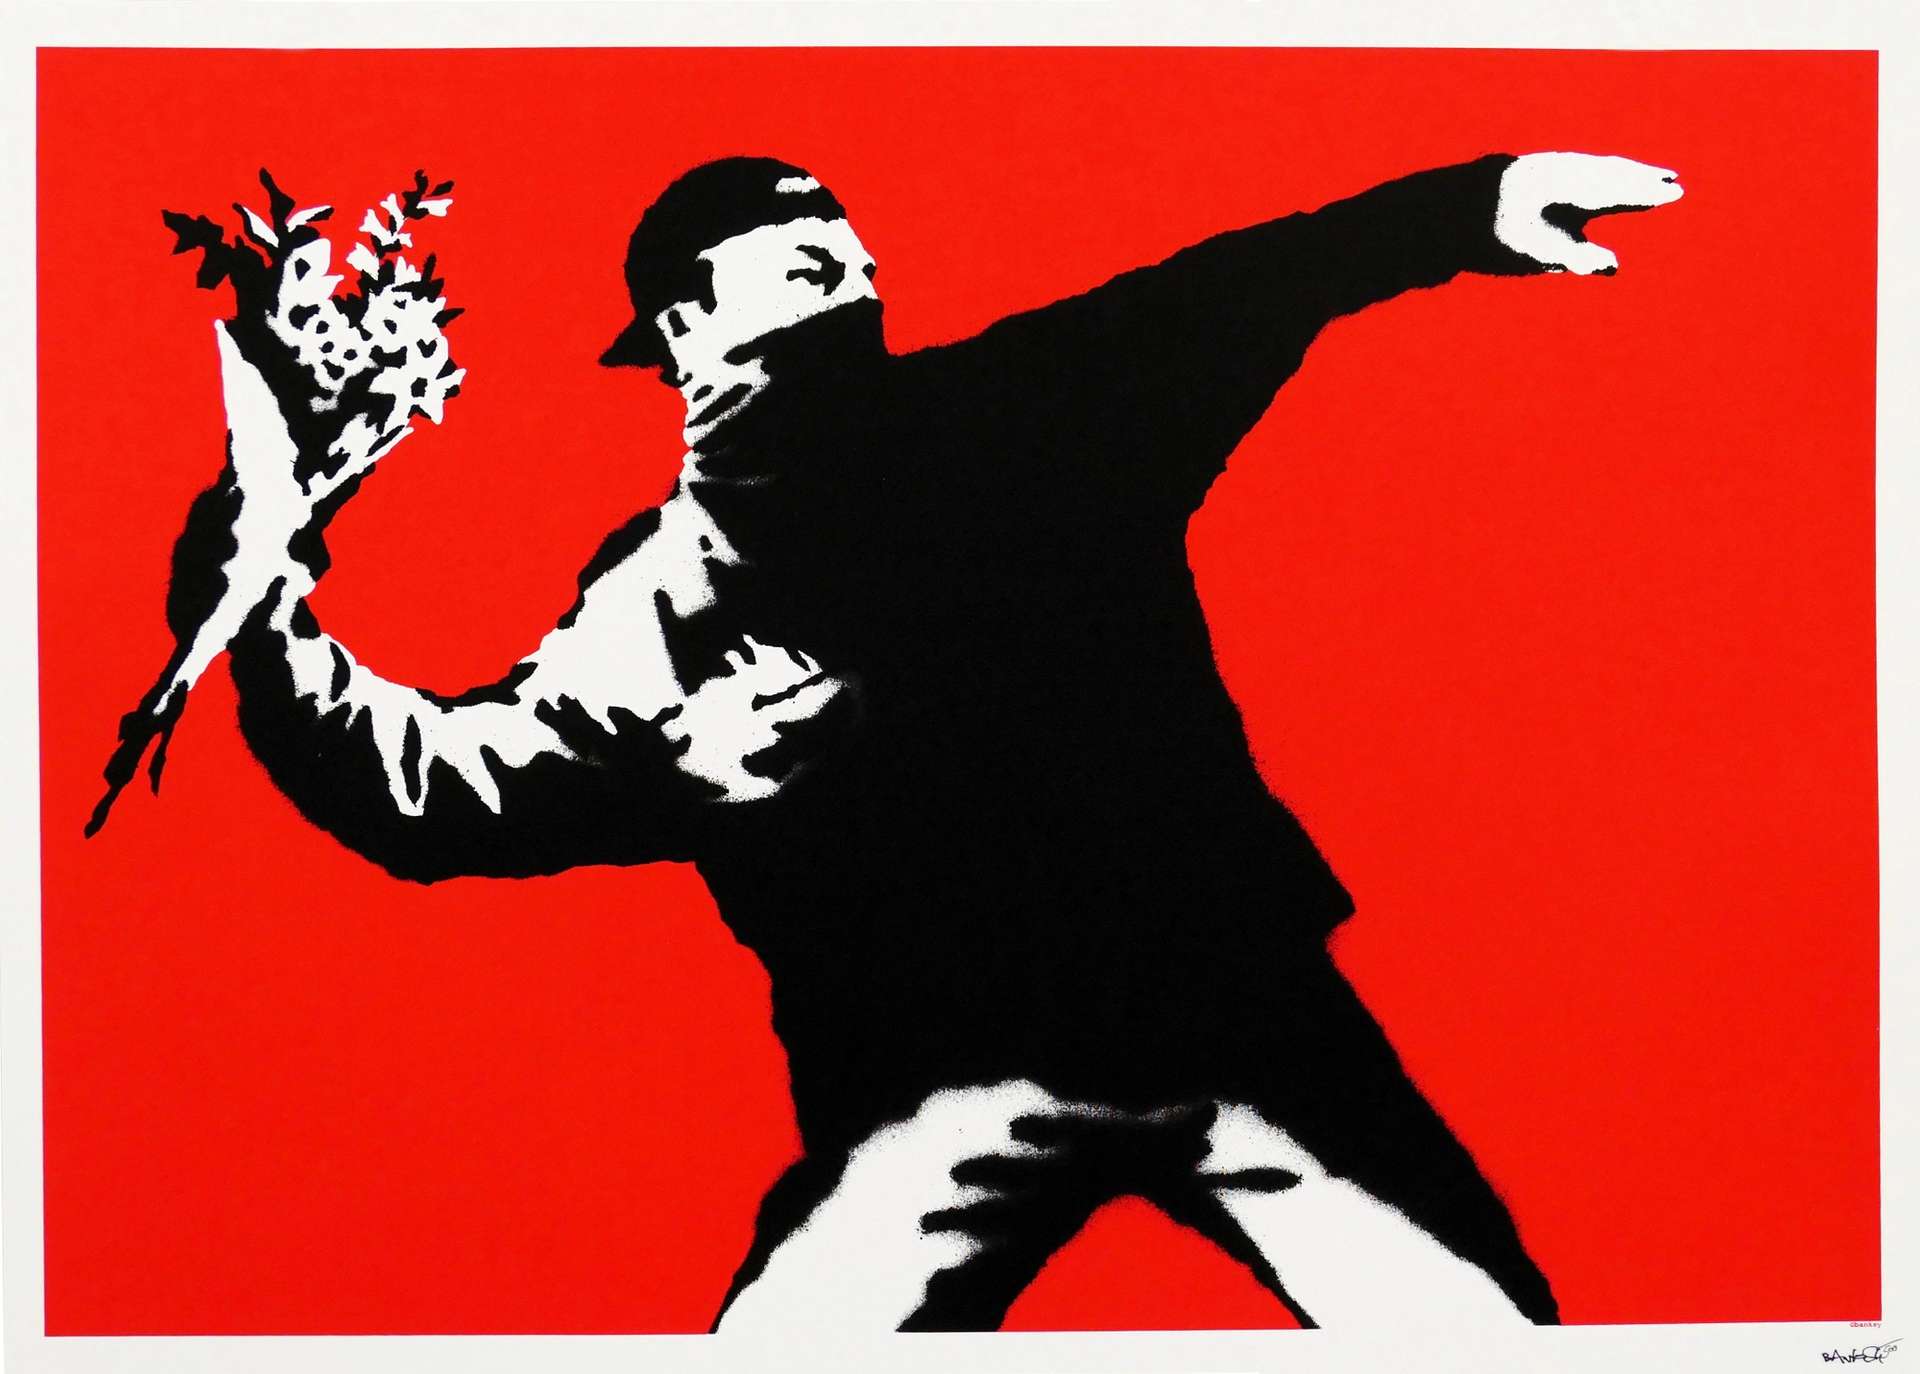 A screenprint by Banksy a balaclava-wearing man holding a bouquet of flowers instead of a bomb against a bright red background.